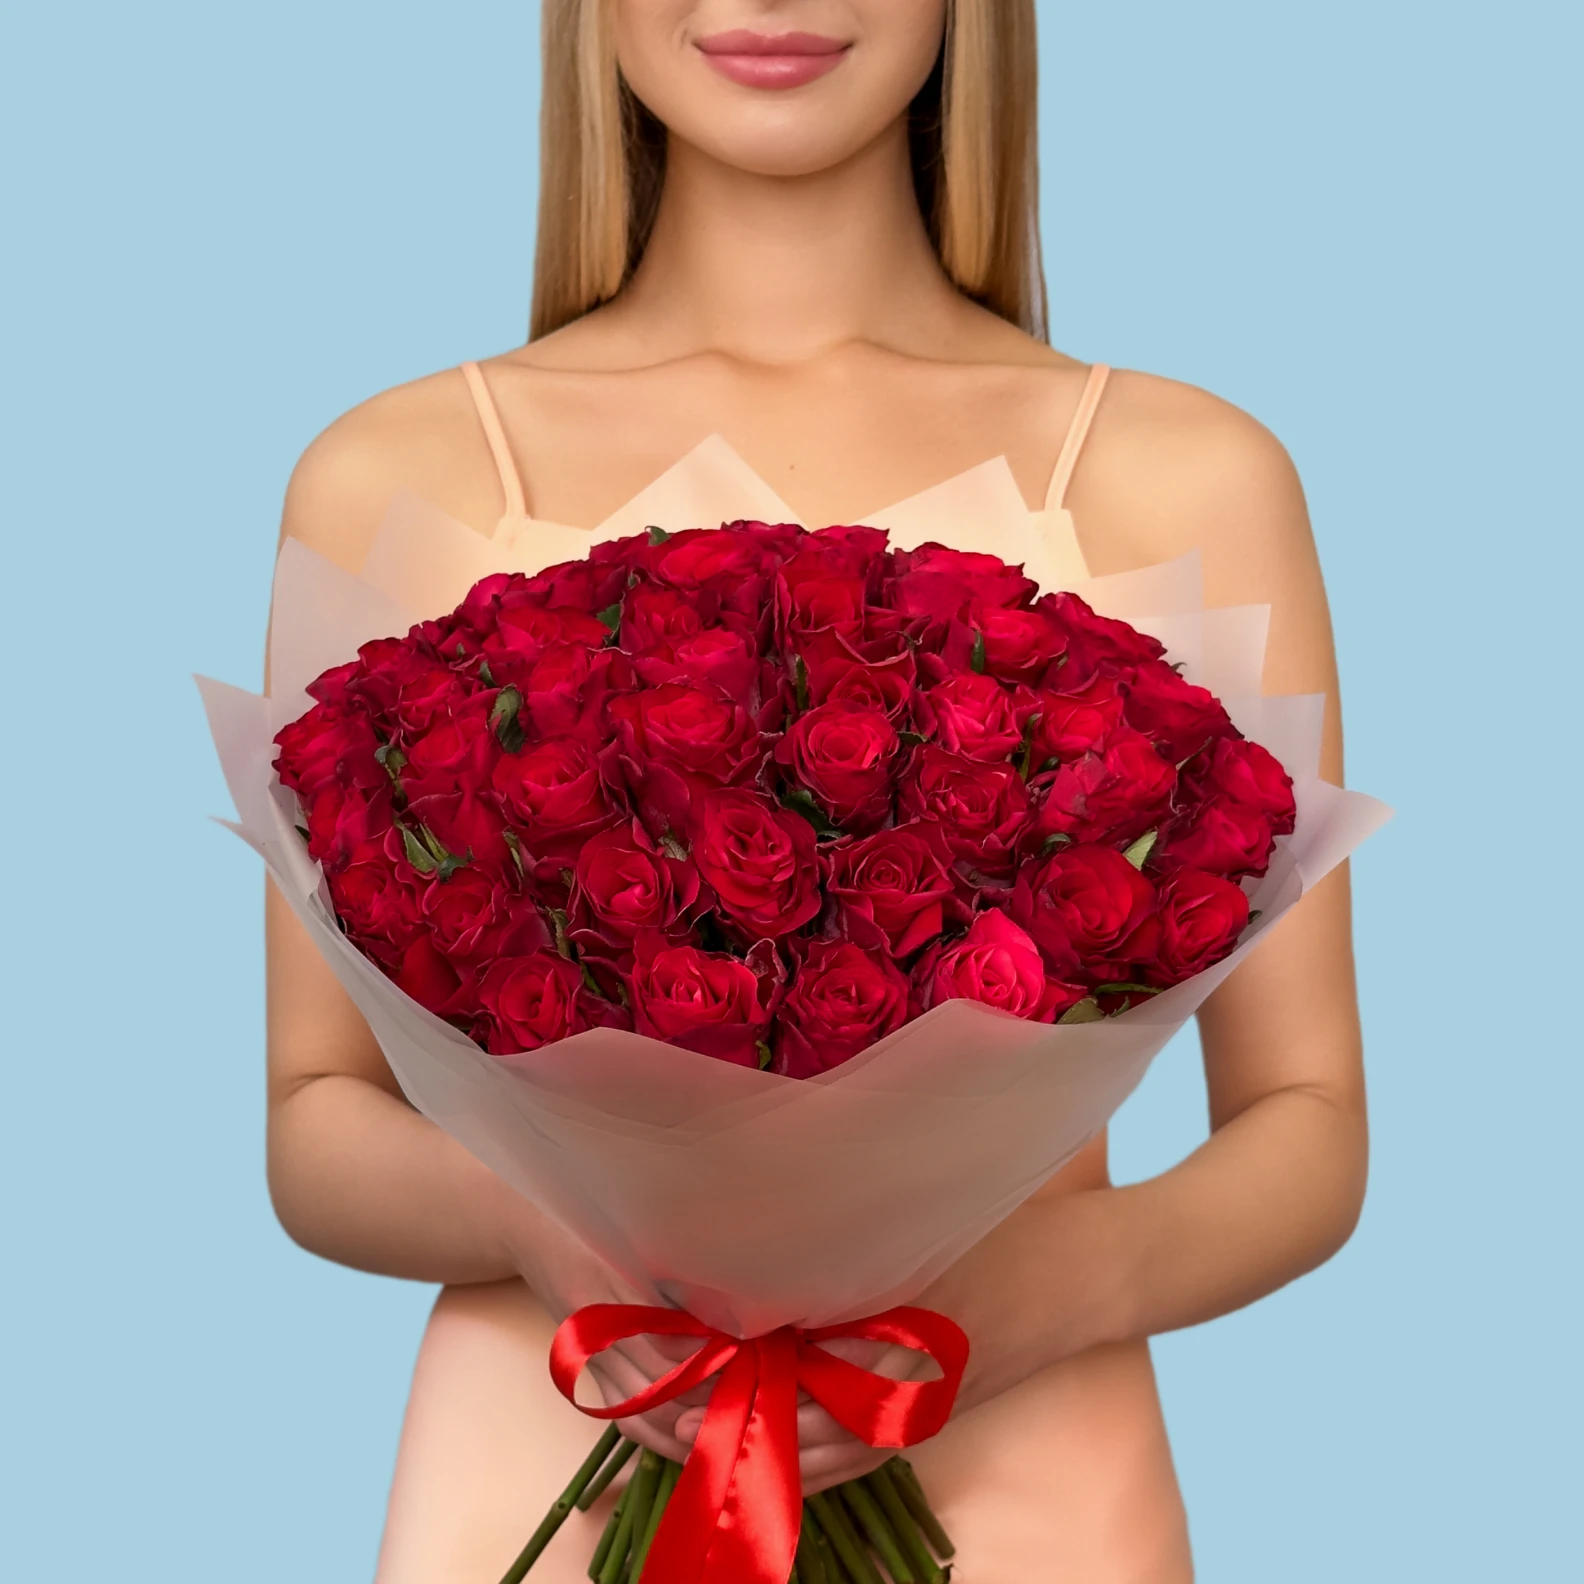 50 Red Roses from Kenya - image №1